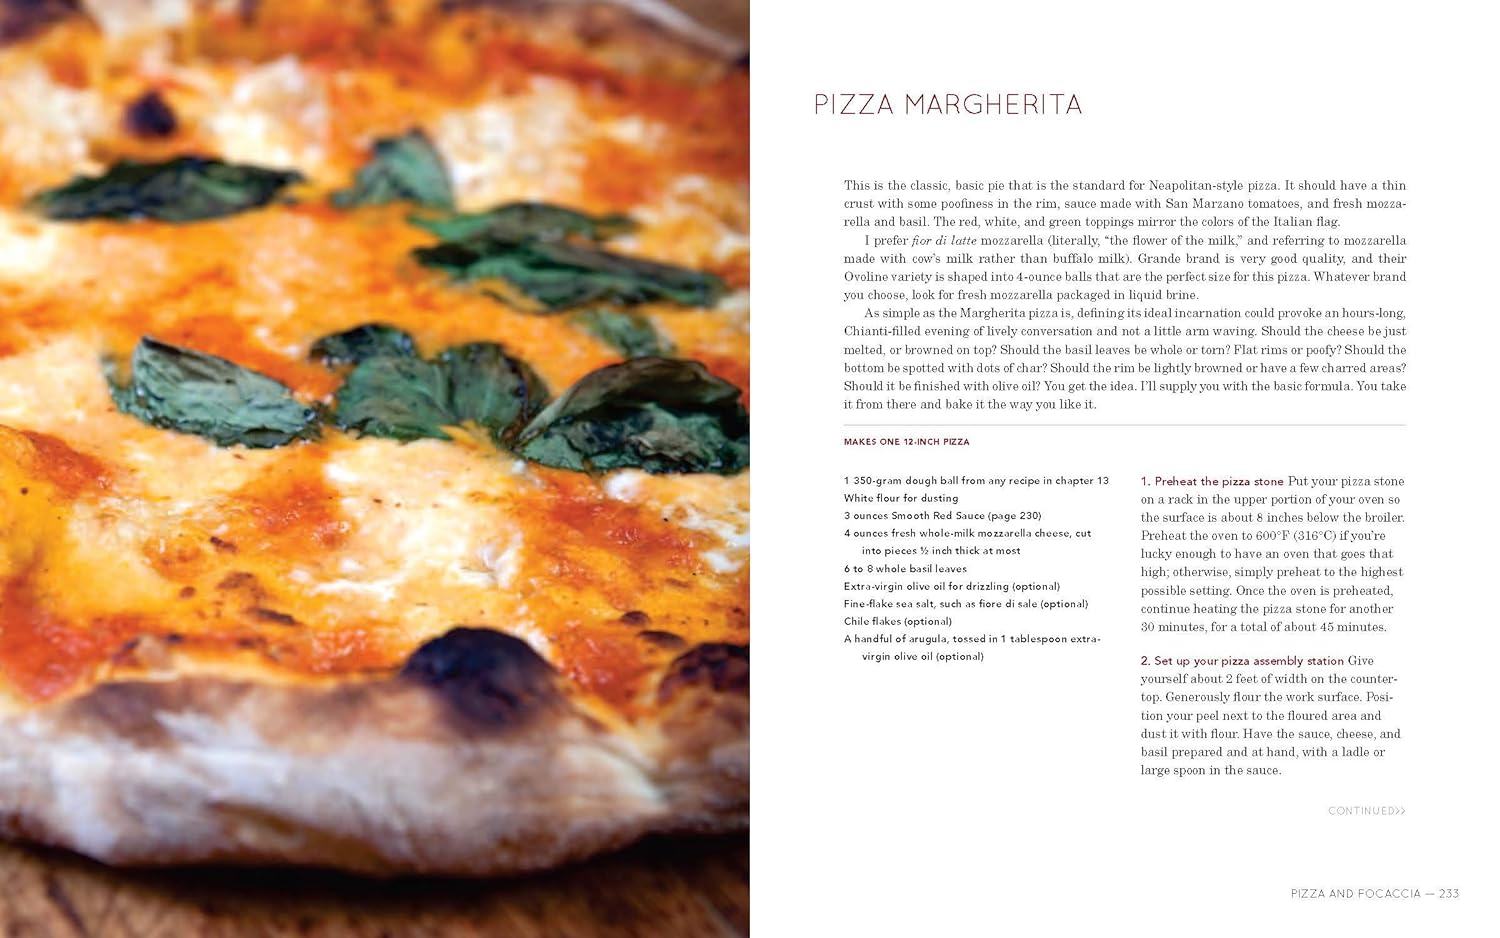 Flour Water Salt Yeast: The Fundamentals of Artisan Bread and Pizza [A Cookbook]     Hardcover – September 18, 2012